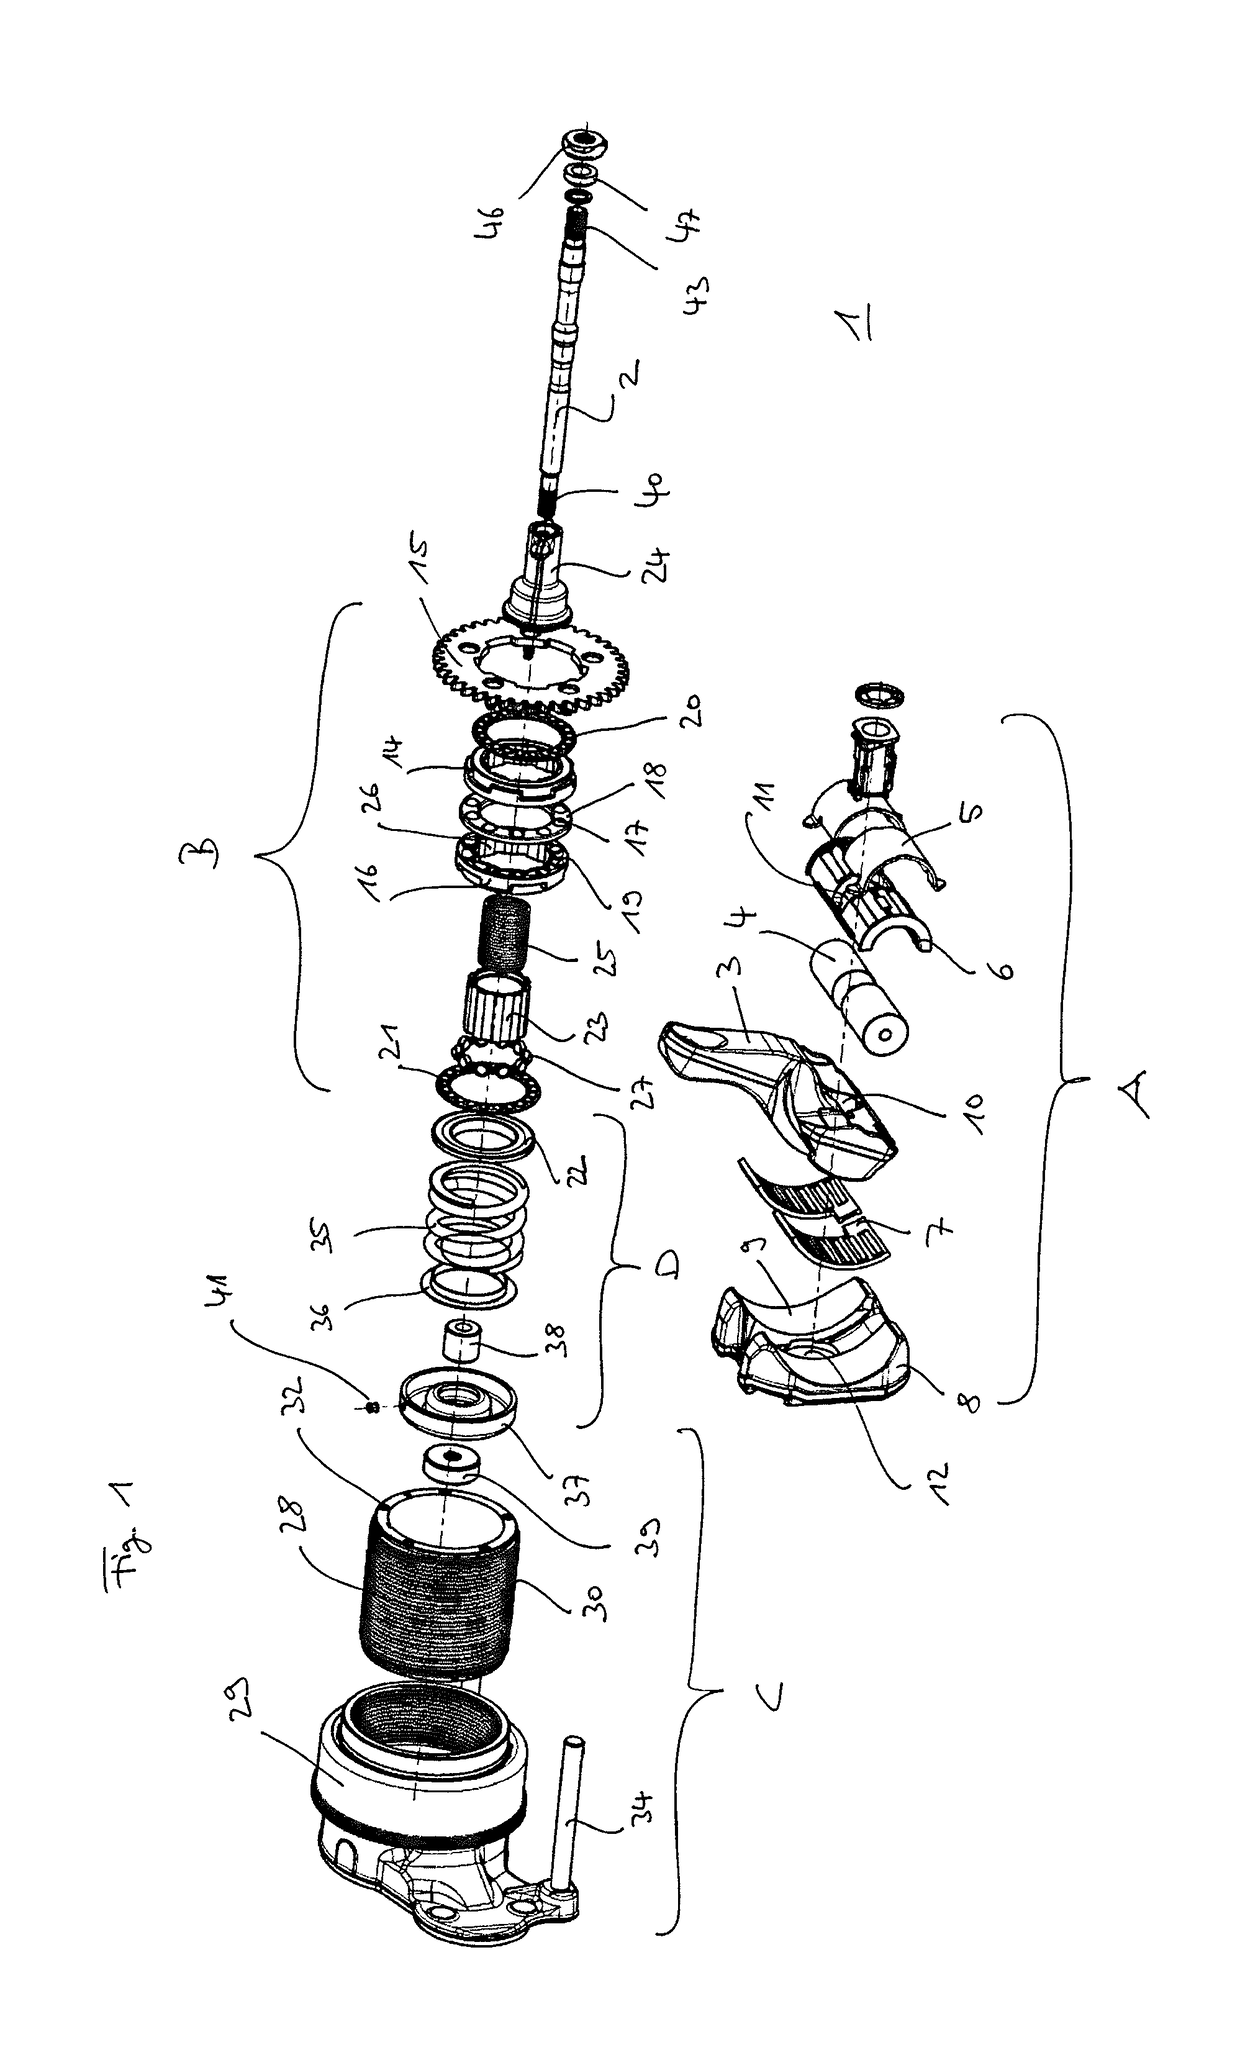 Disc brake and brake actuation mechanism for a disc brake